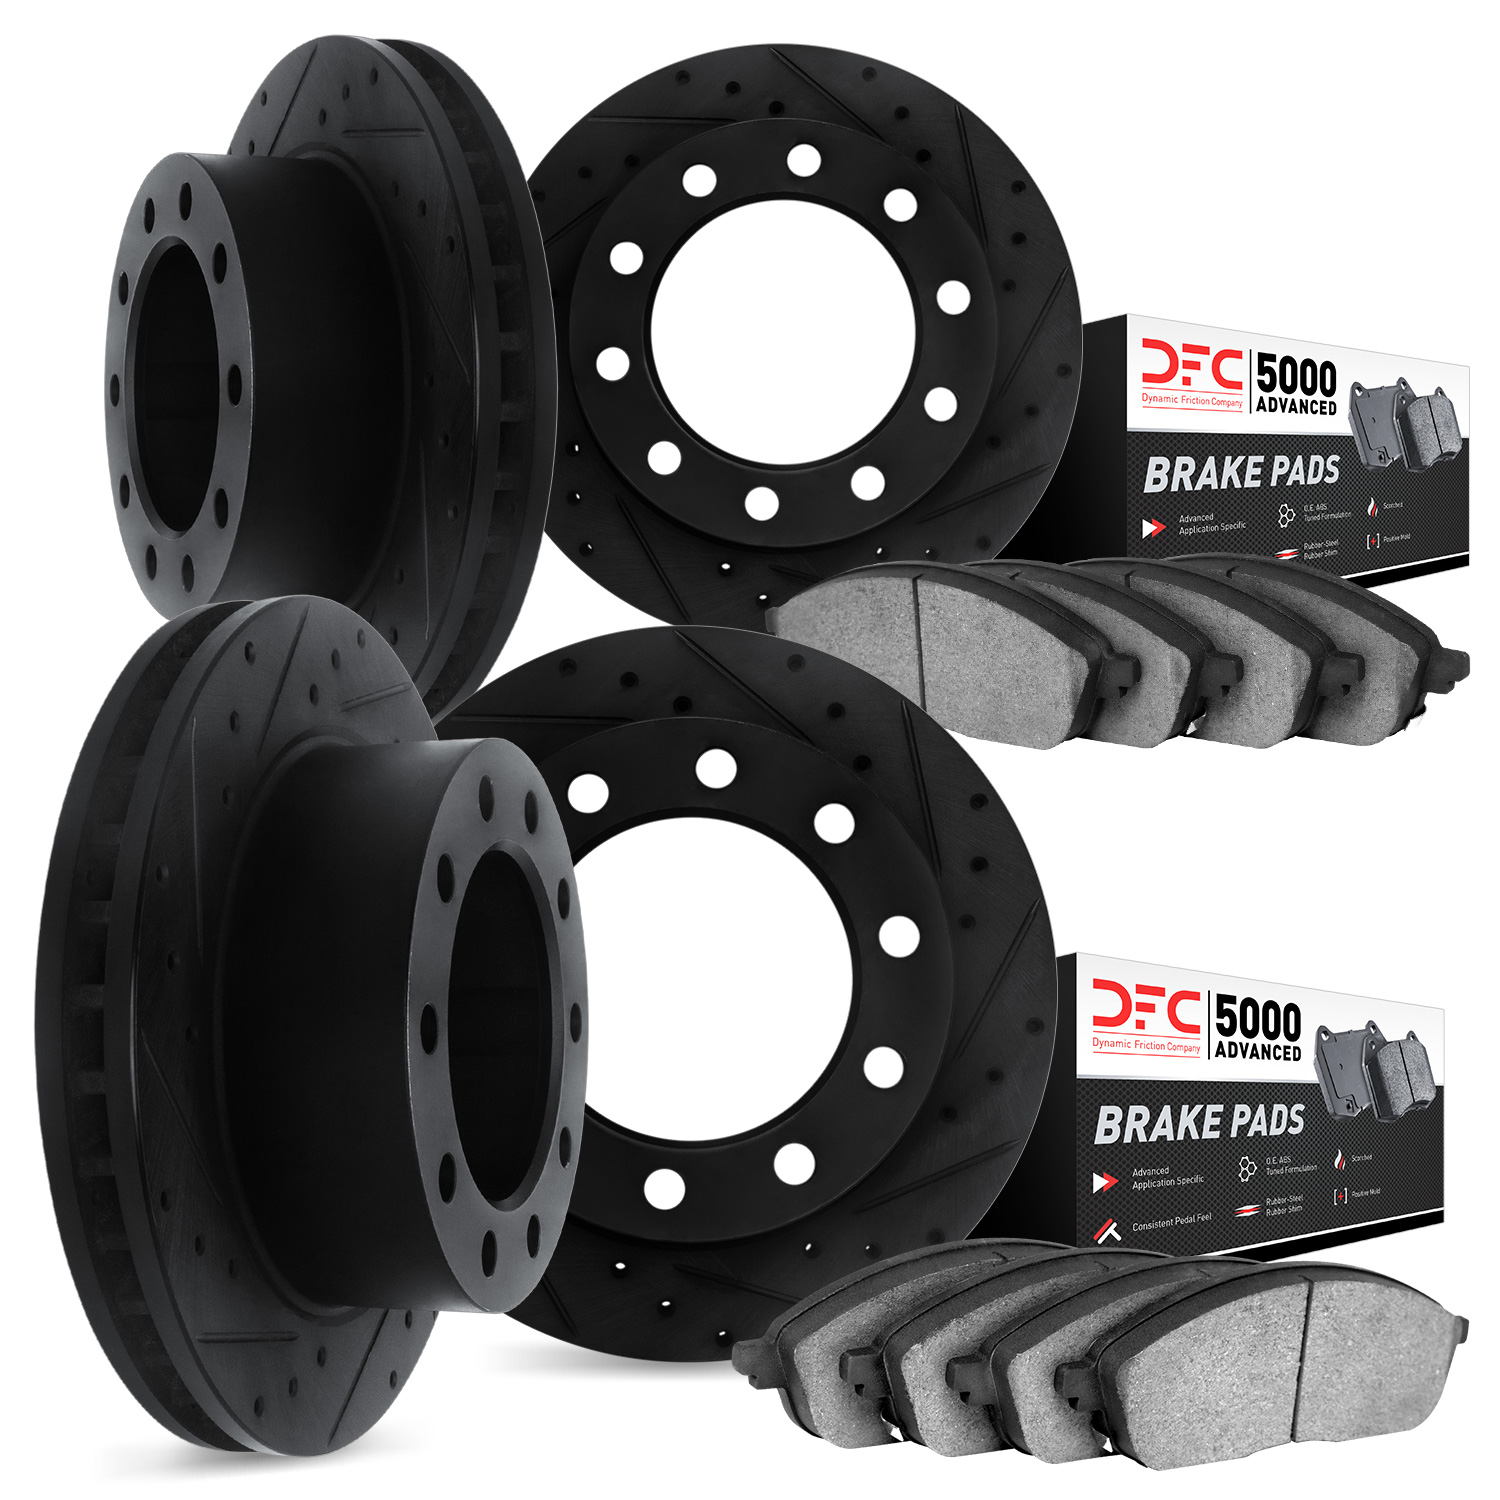 8504-48003 Drilled/Slotted Brake Rotors w/5000 Advanced Brake Pads Kit [Black], 1998-1999 GM, Position: Front and Rear